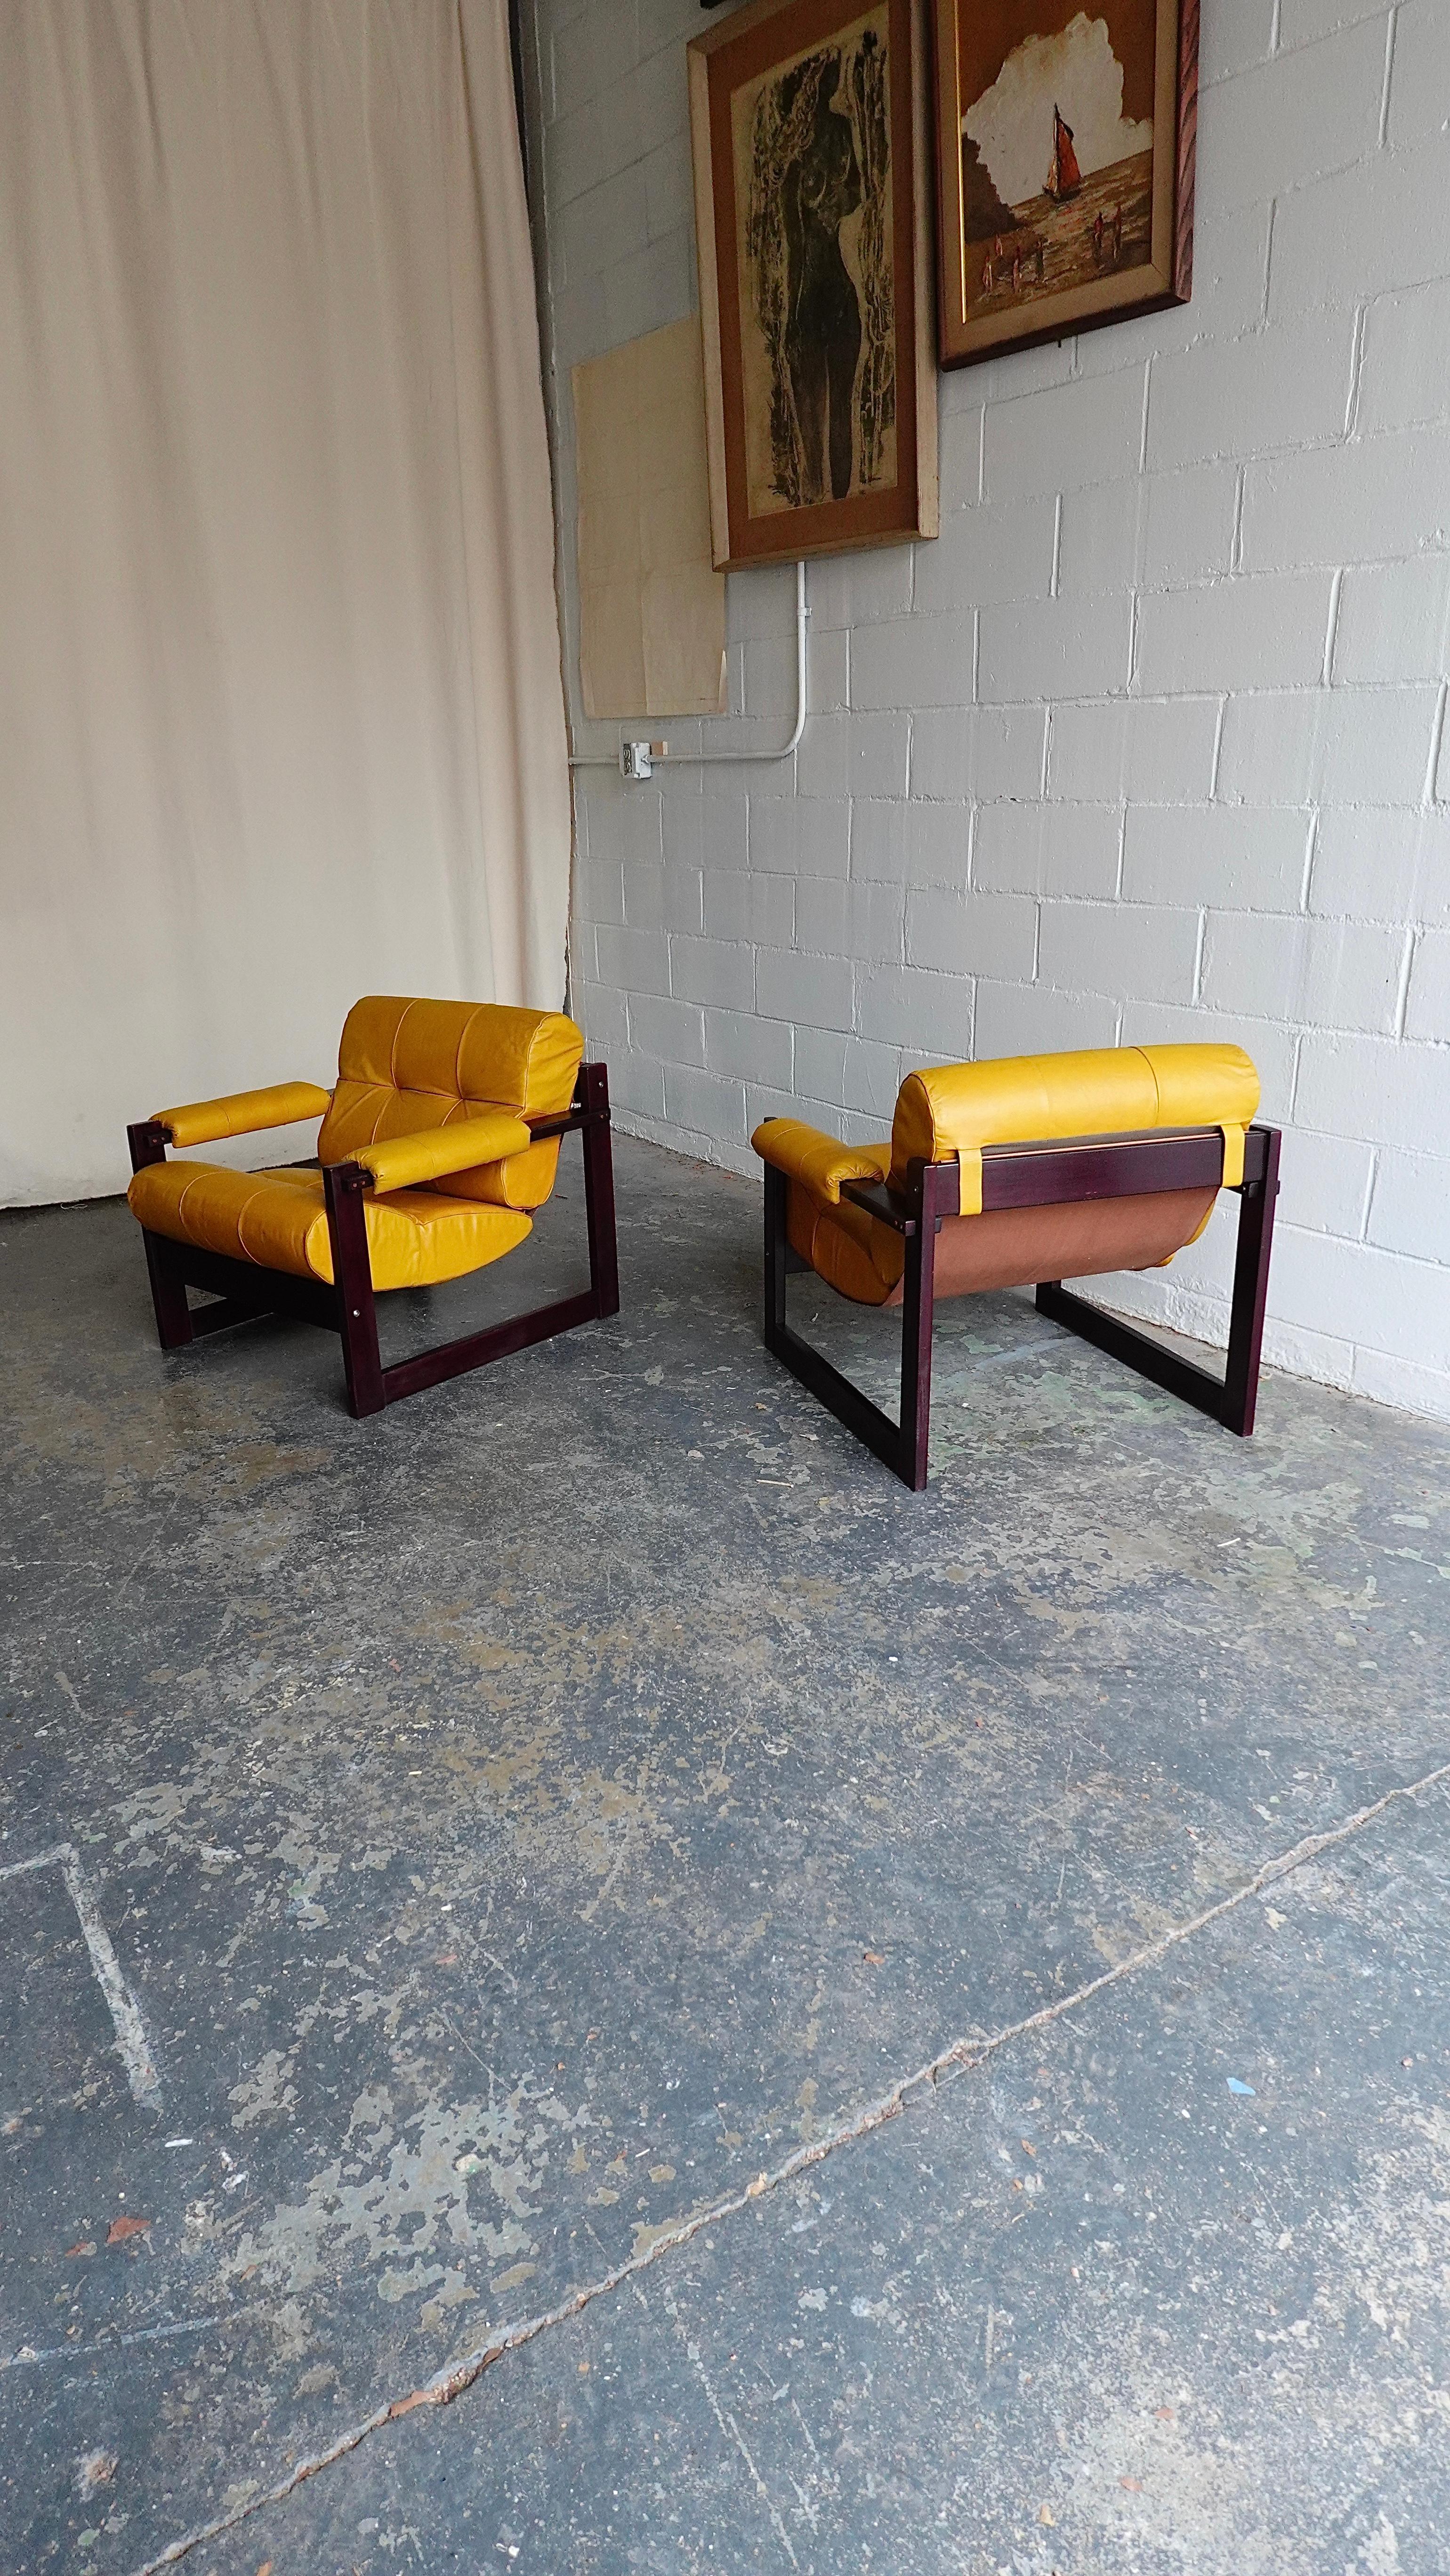 Pr. Percival Lafer MP-167 Lounge Chairs in Jatoba & Leather, 1970s For Sale 3